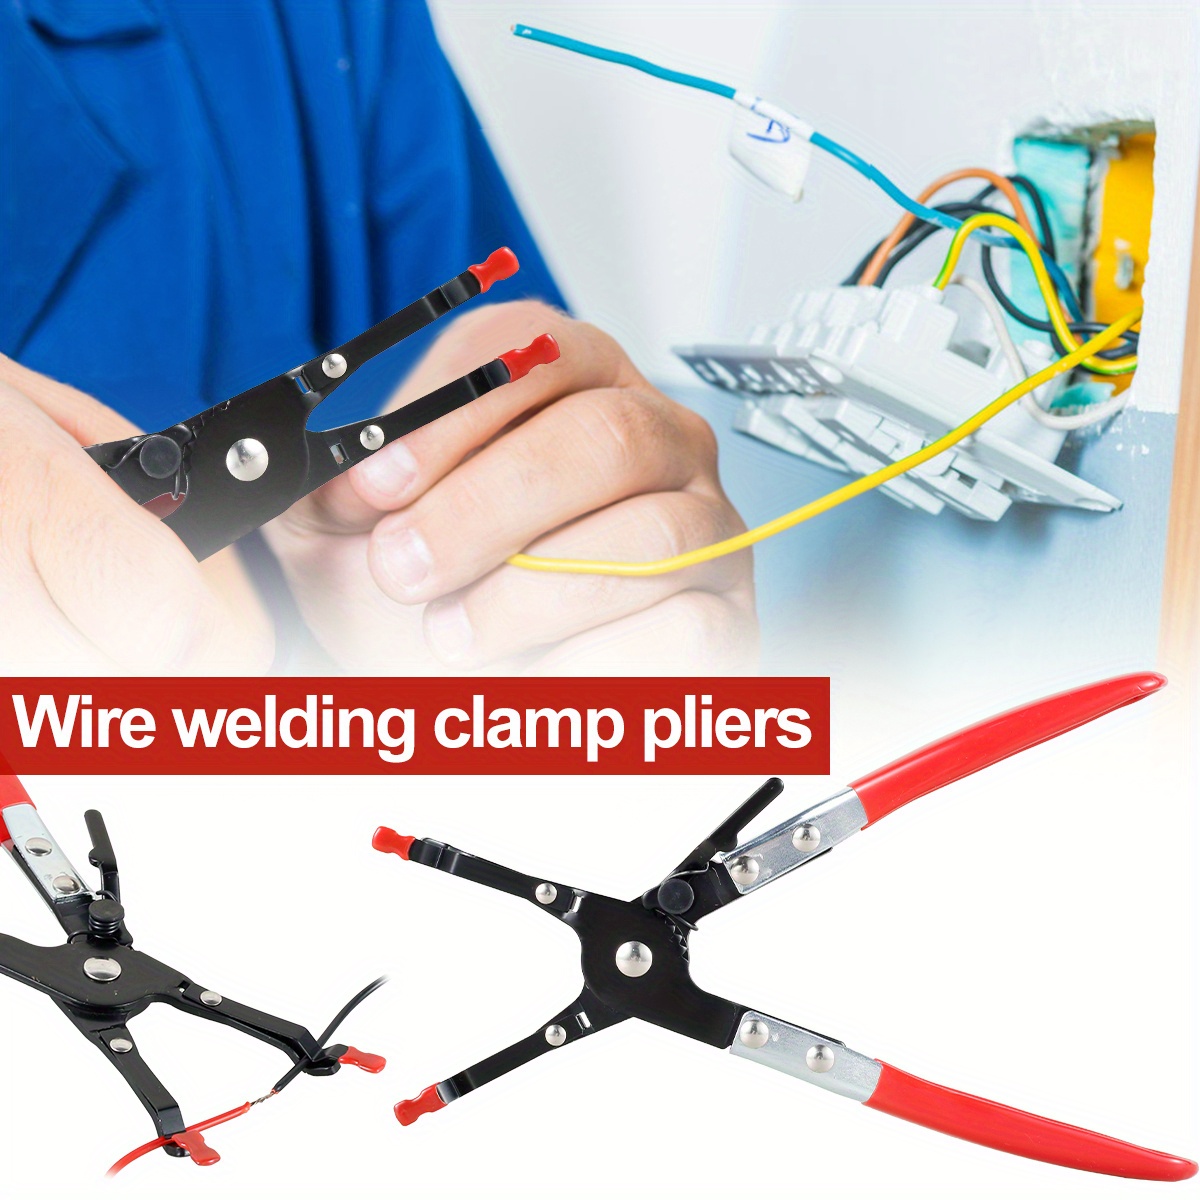 Soldering Plier Car Vehicle Soldering Aid Pliers Metal Wire Welding Clamp  Professional Pick Up Aid Plier Hold 2 Wires Auto Fixing Repair Tool